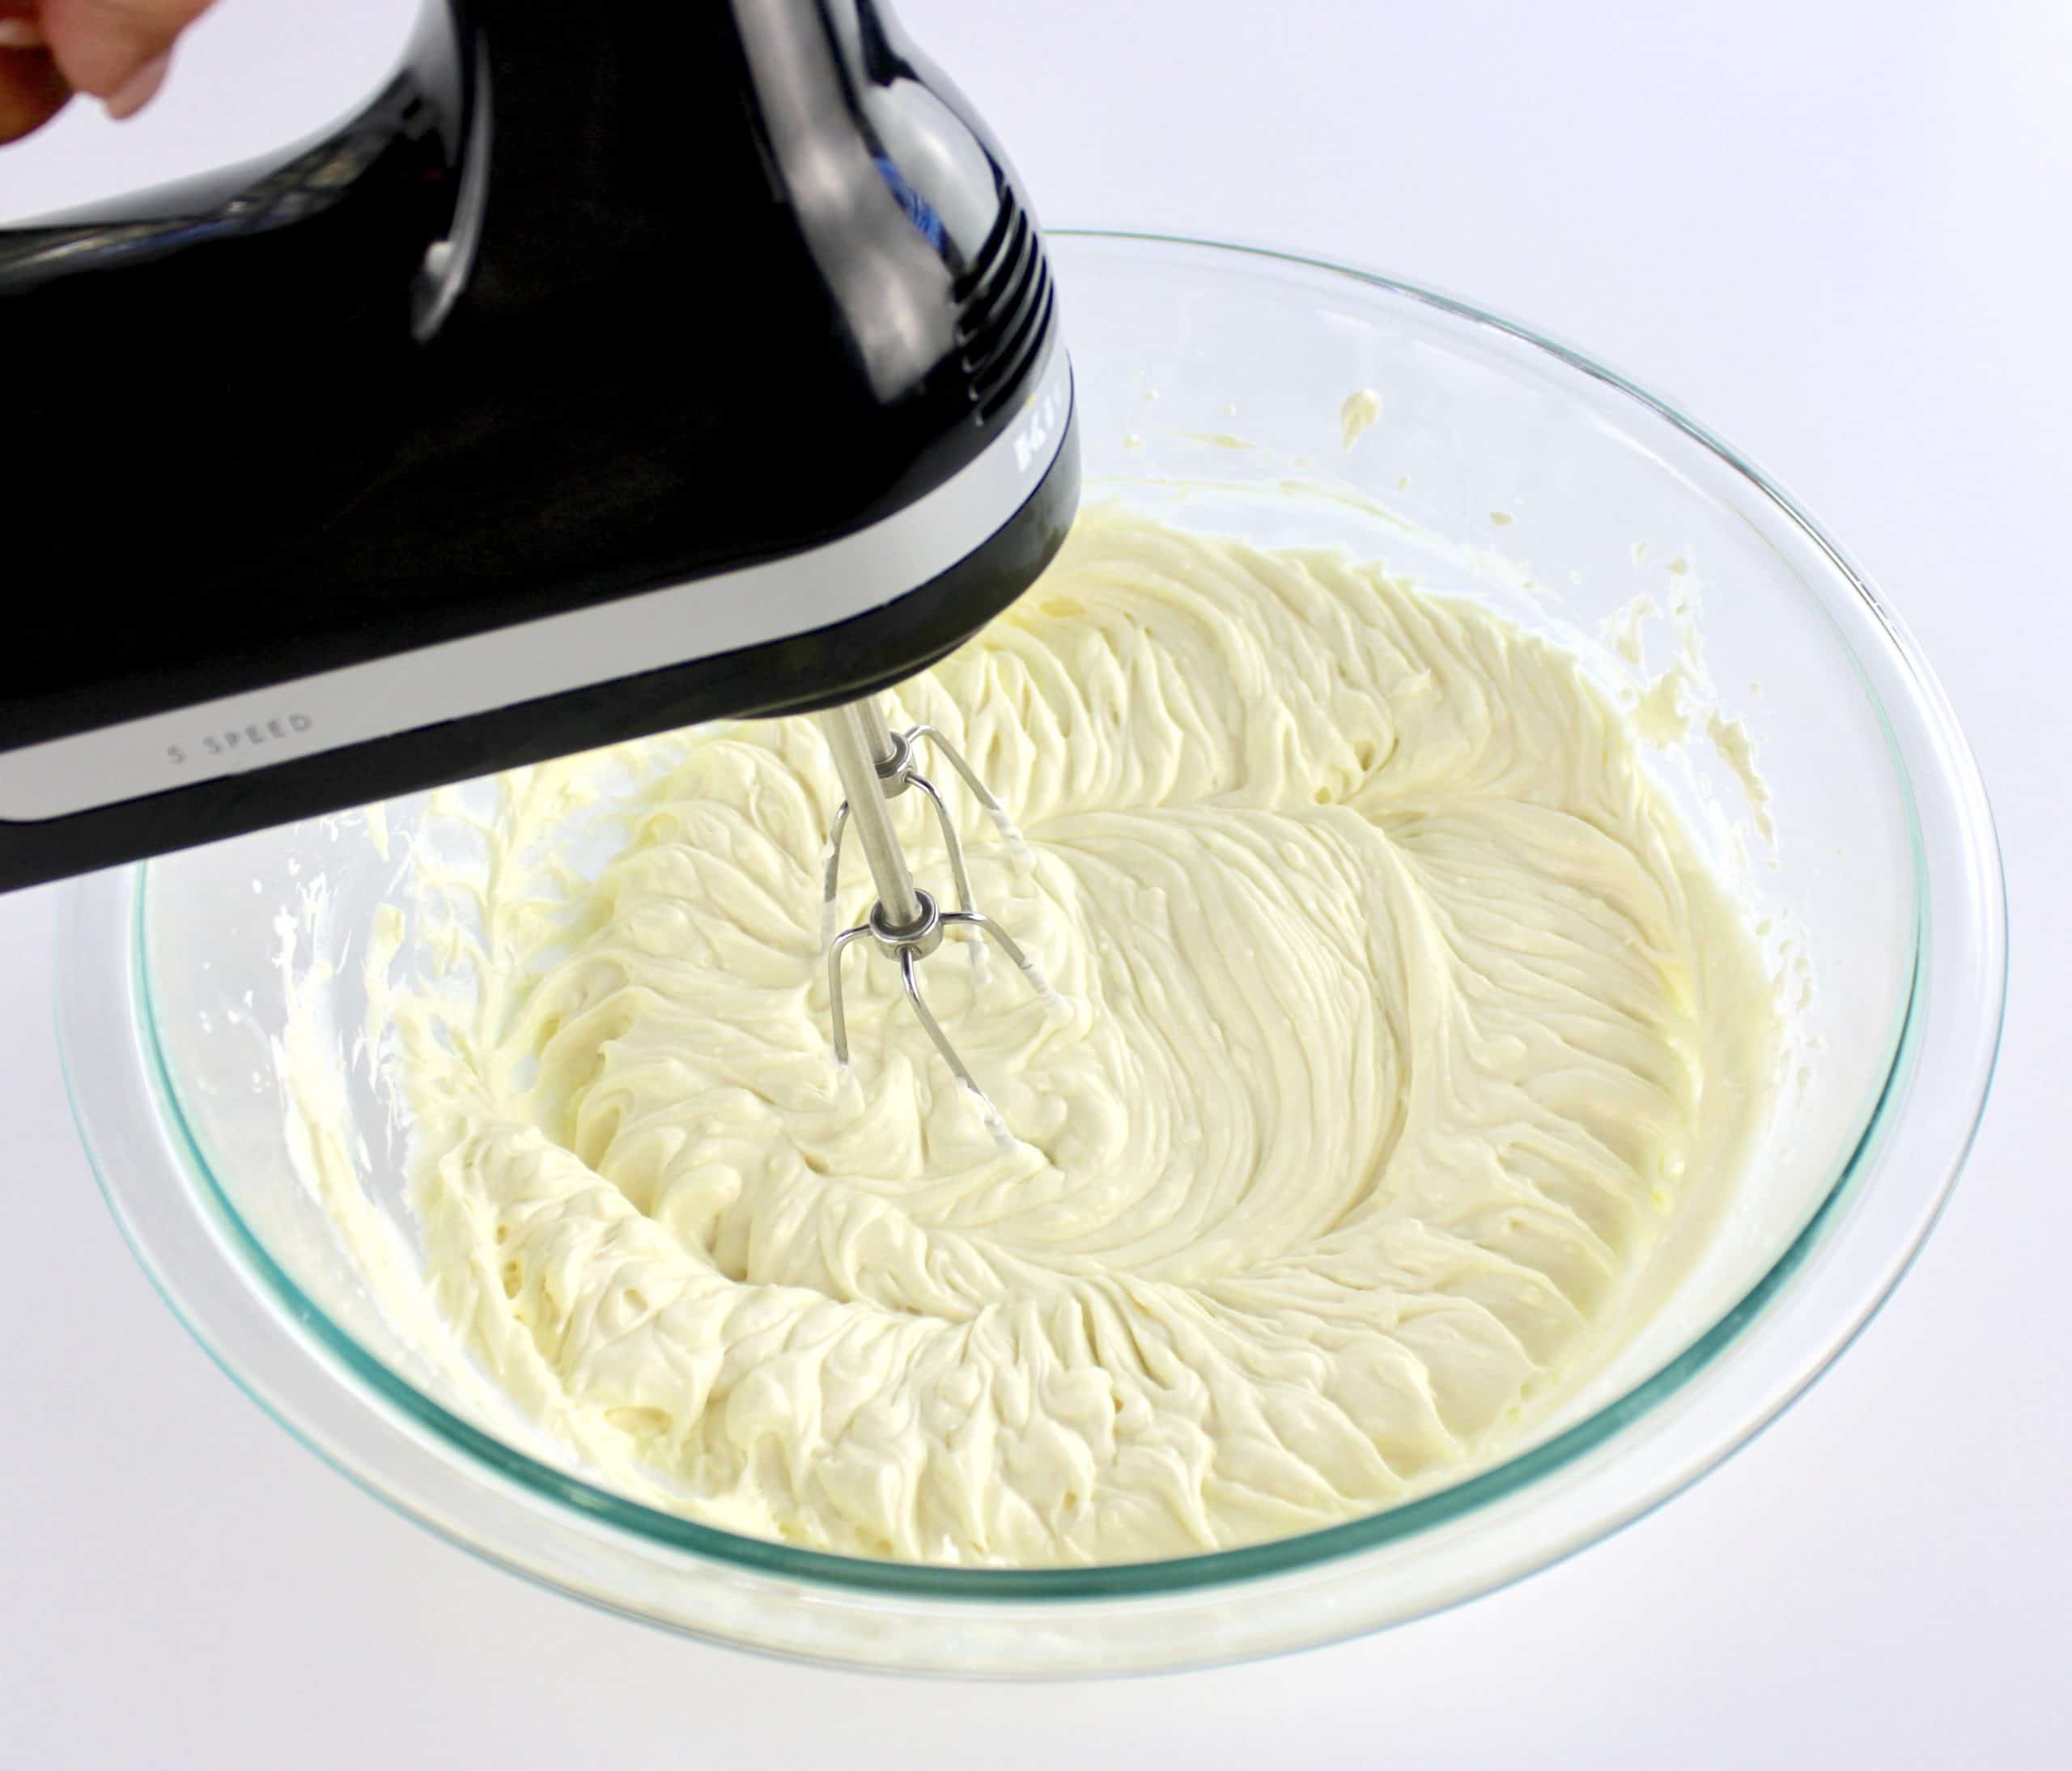 cheesecake filling being whipped with hand mixer in glass bowl